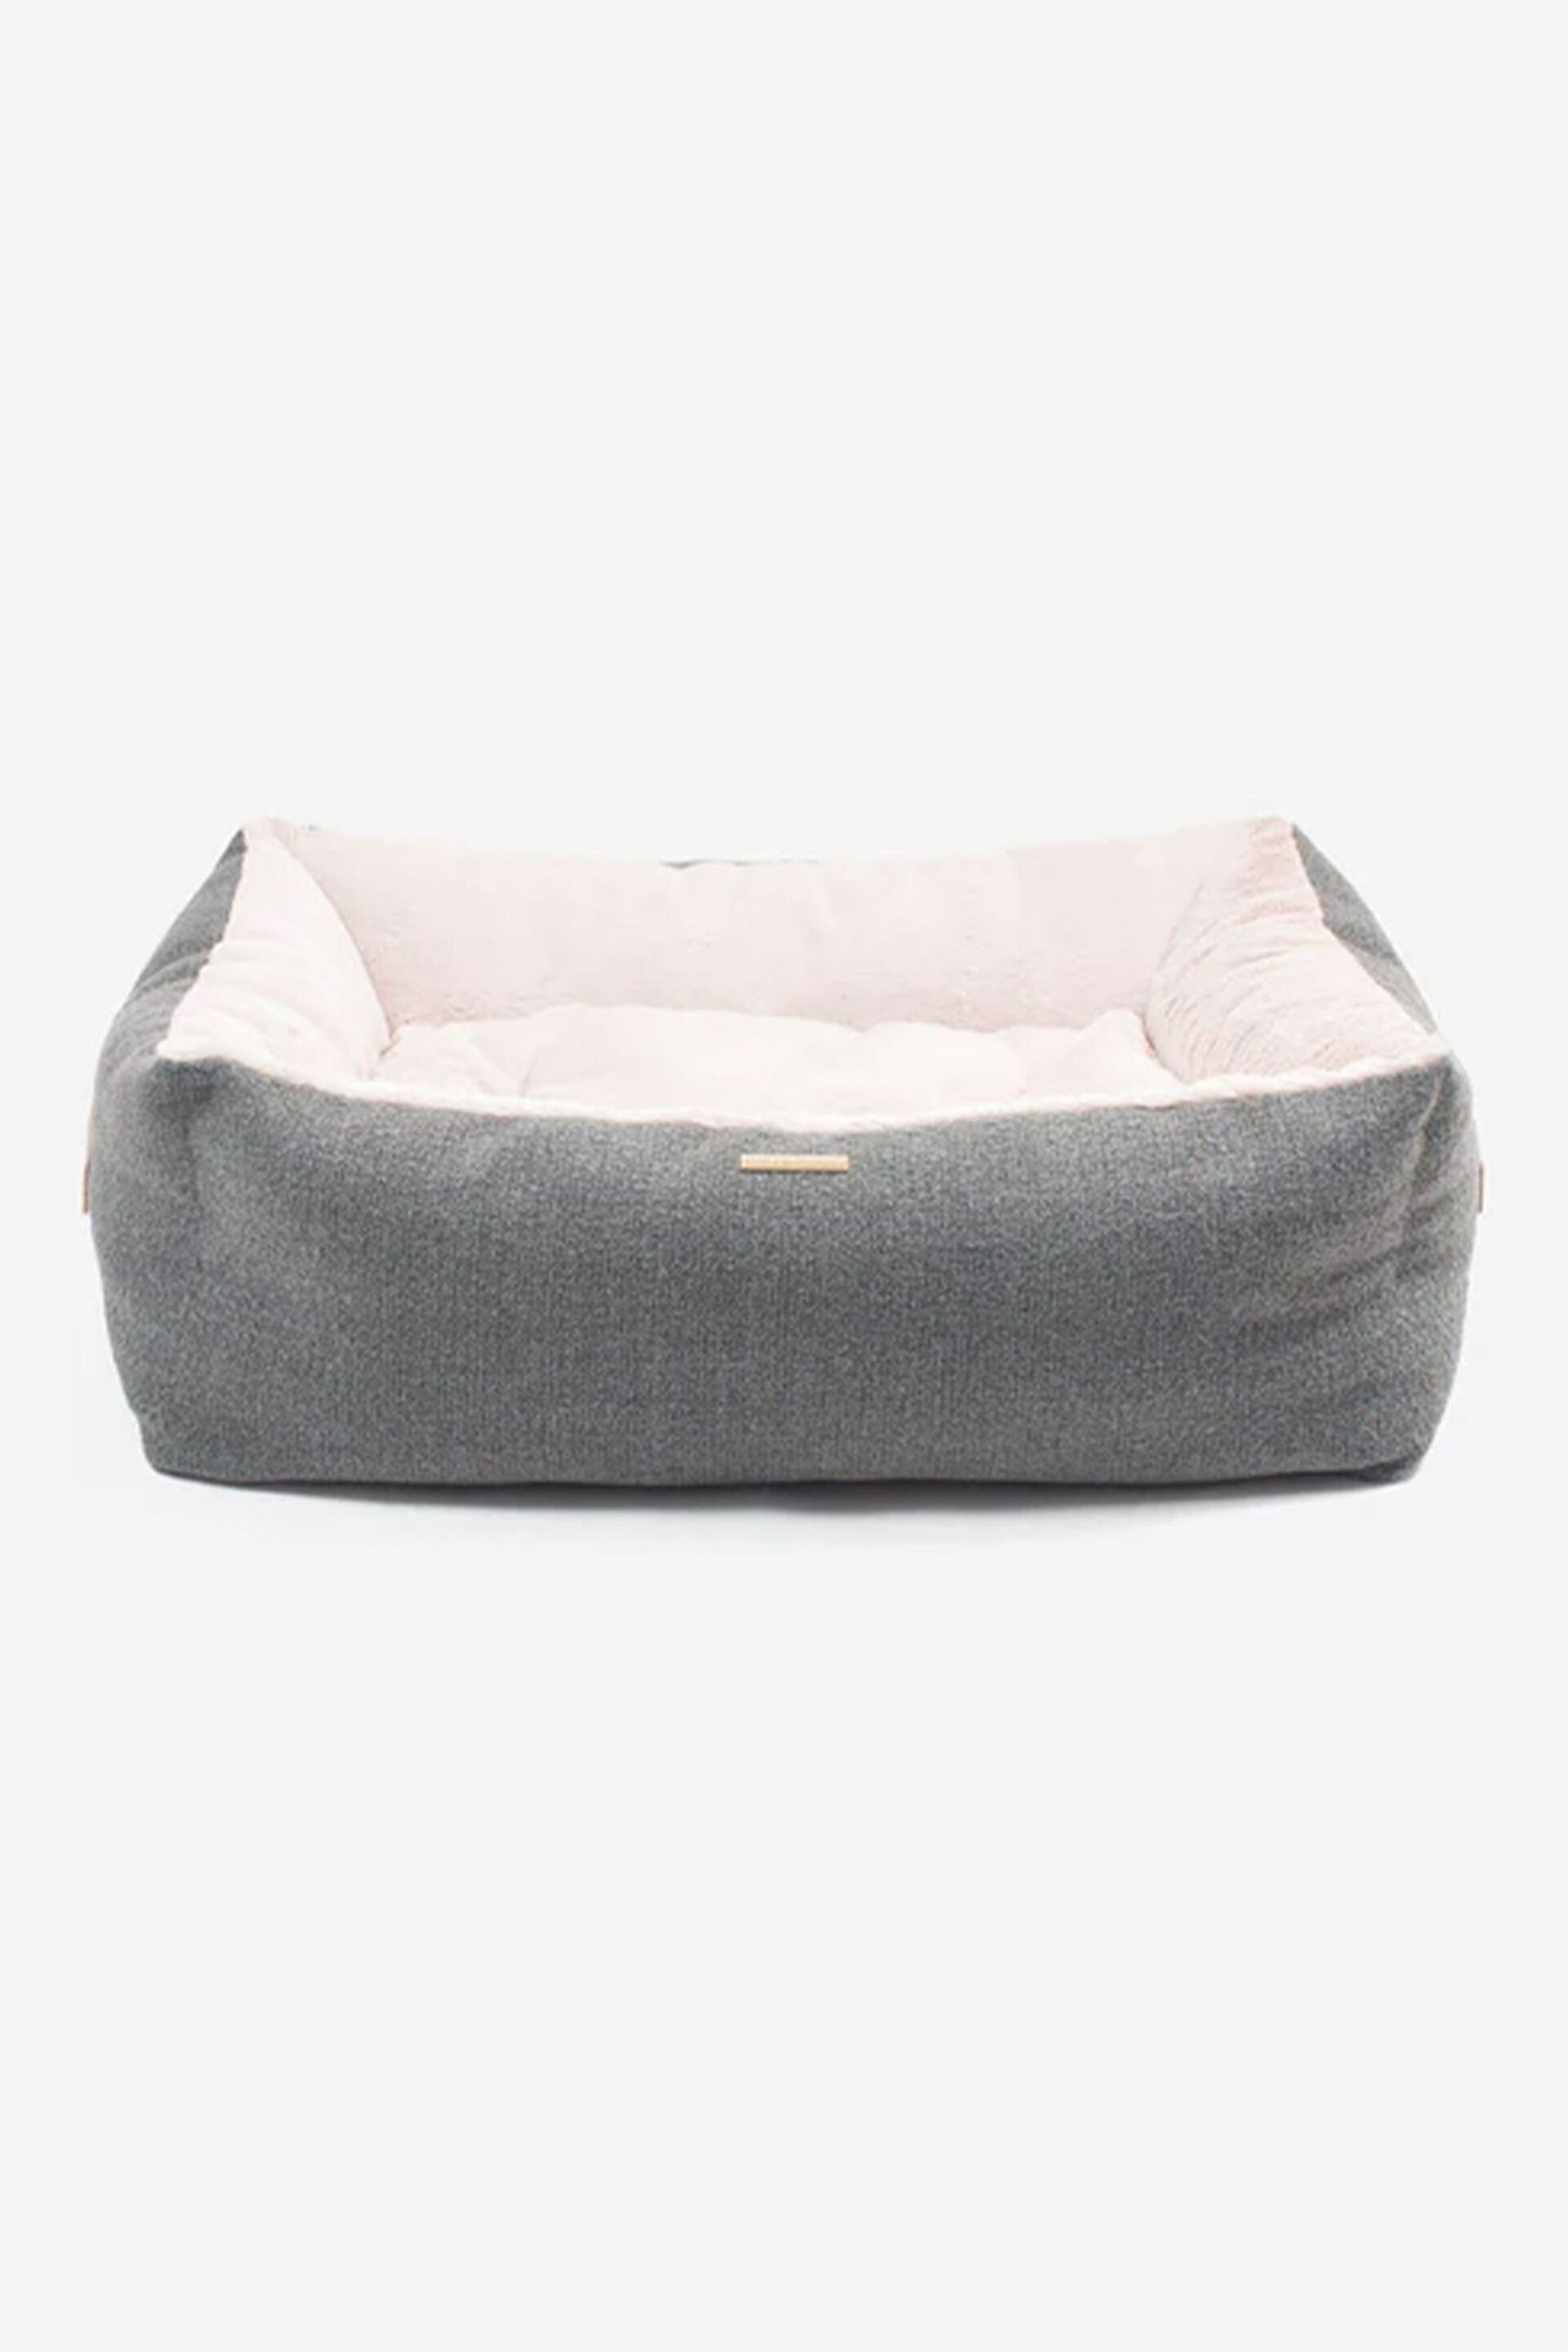 Lords and Labradors Grey Essentials Herdwick Dog Box Bed - Image 5 of 5